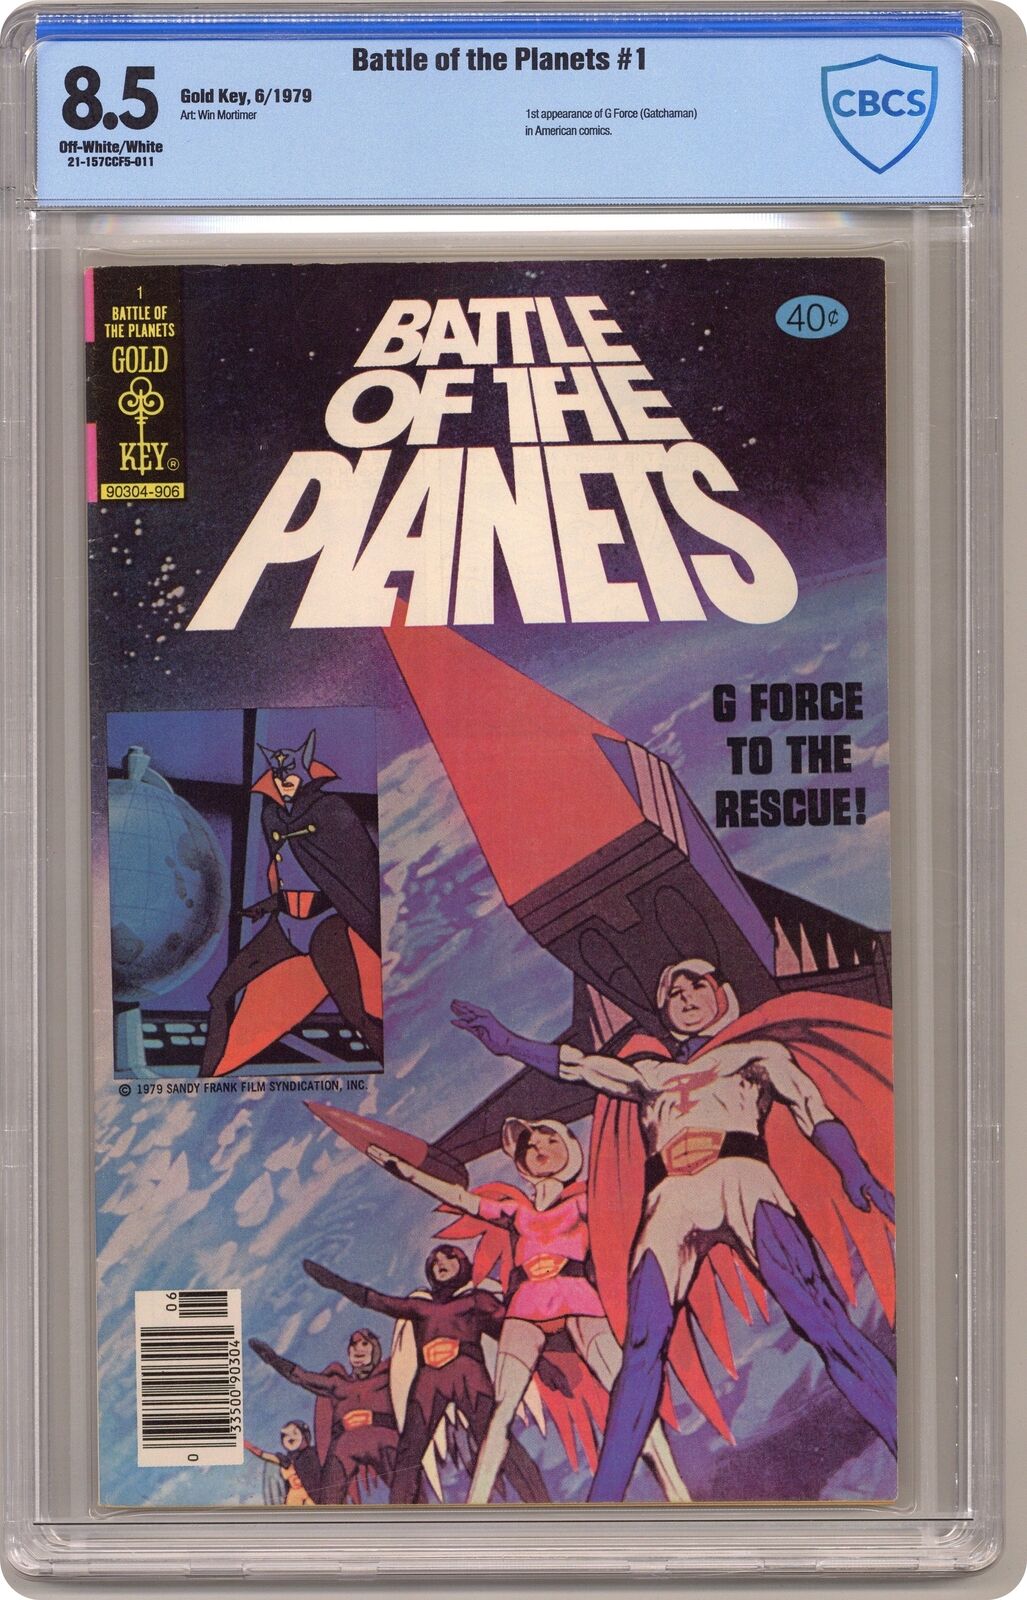 Battle of the Planets #1 CBCS 8.5 1979 Gold Key 21-157CCF5-011